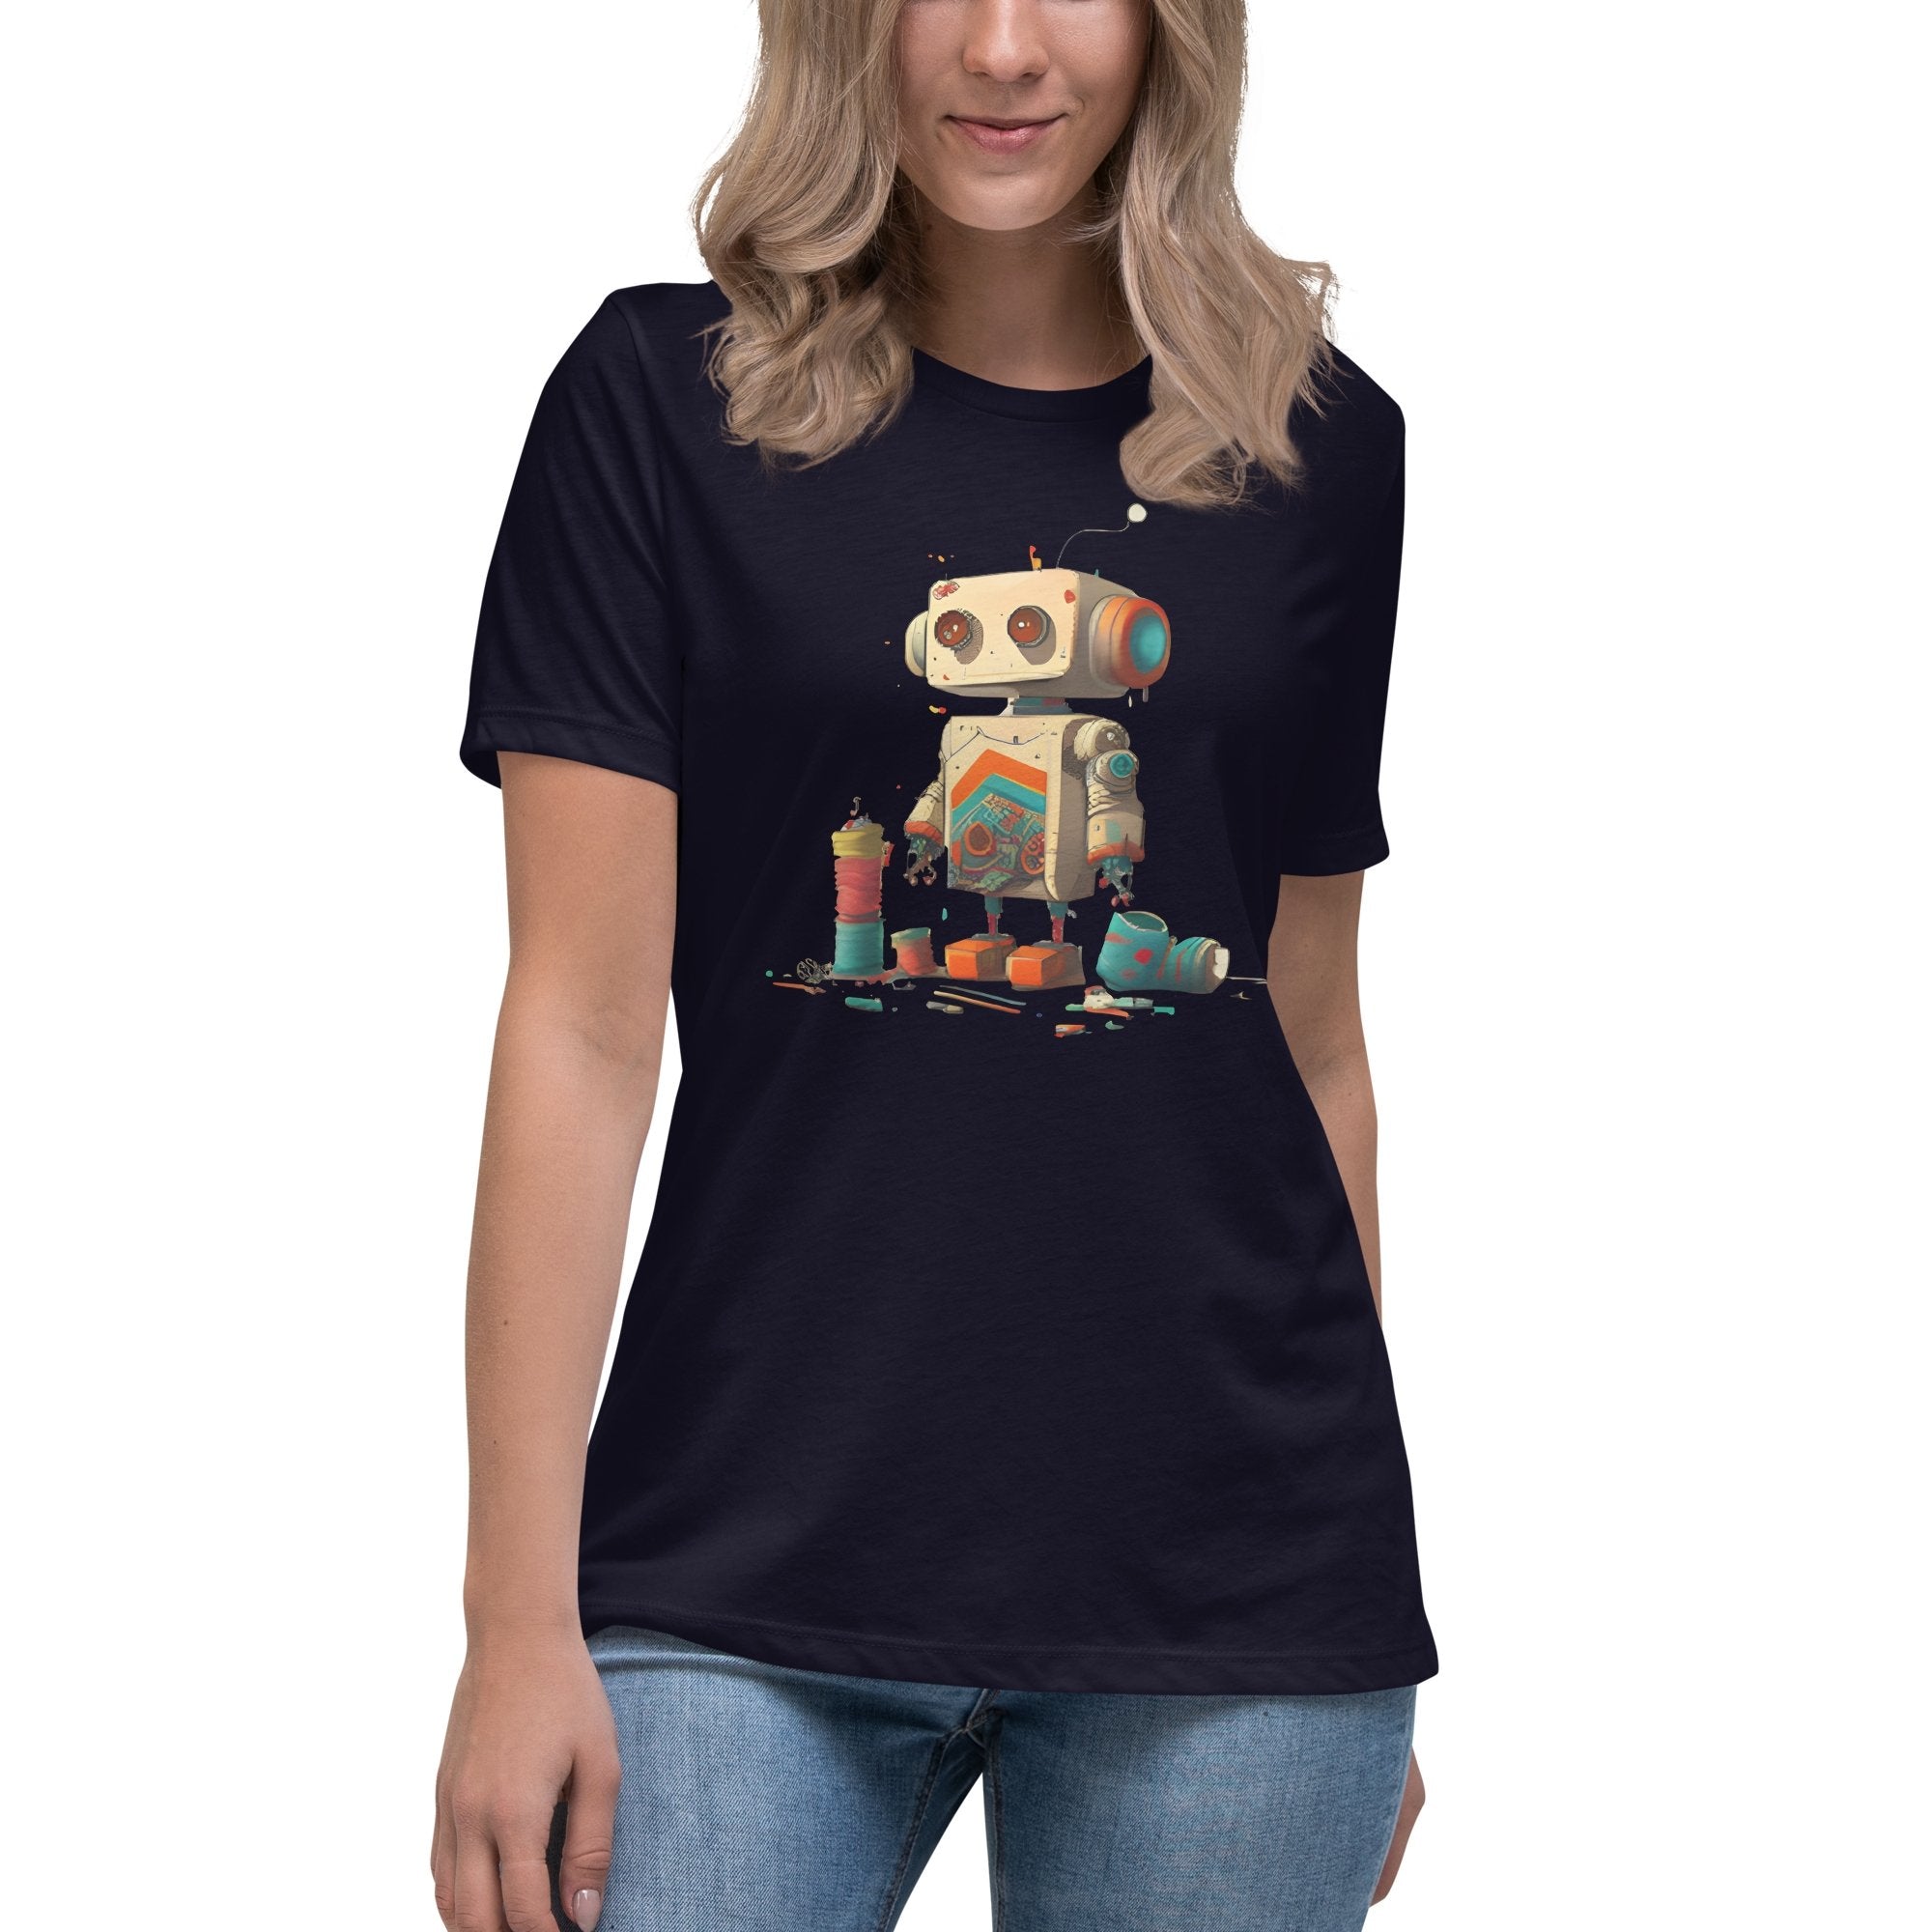 Women's relaxed t-shirt with small Robot design - FabulTrend